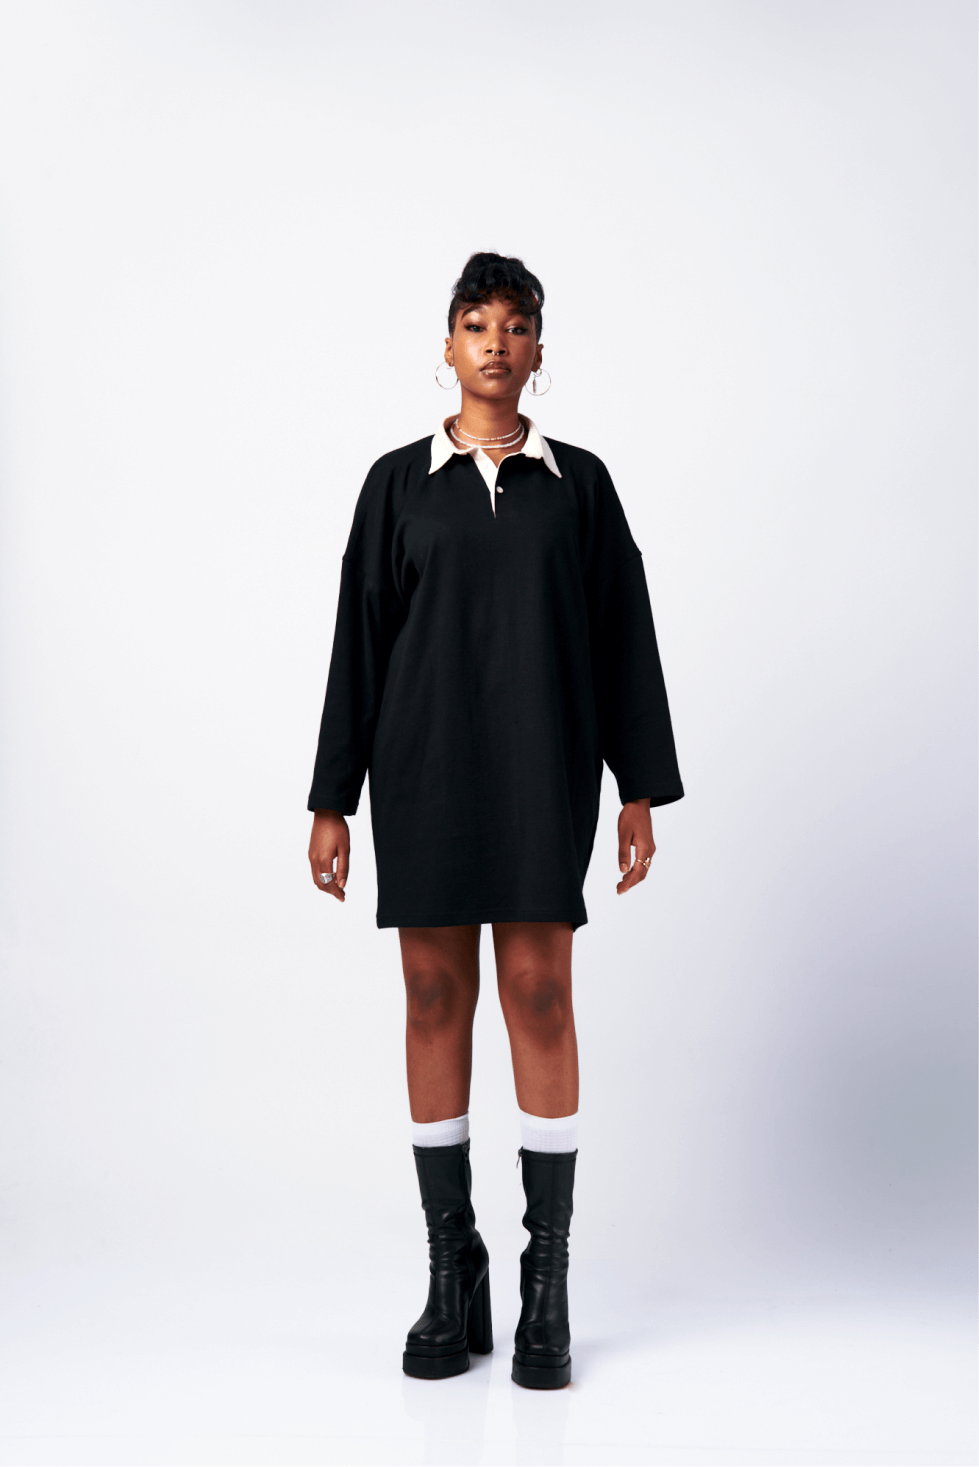 Shop Scrum Shirt Dress by At Odds on Arrai. Discover stylish, affordable clothing, jewelry, handbags and unique handmade pieces from top Kenyan & African fashion brands prioritising sustainability and quality craftsmanship.